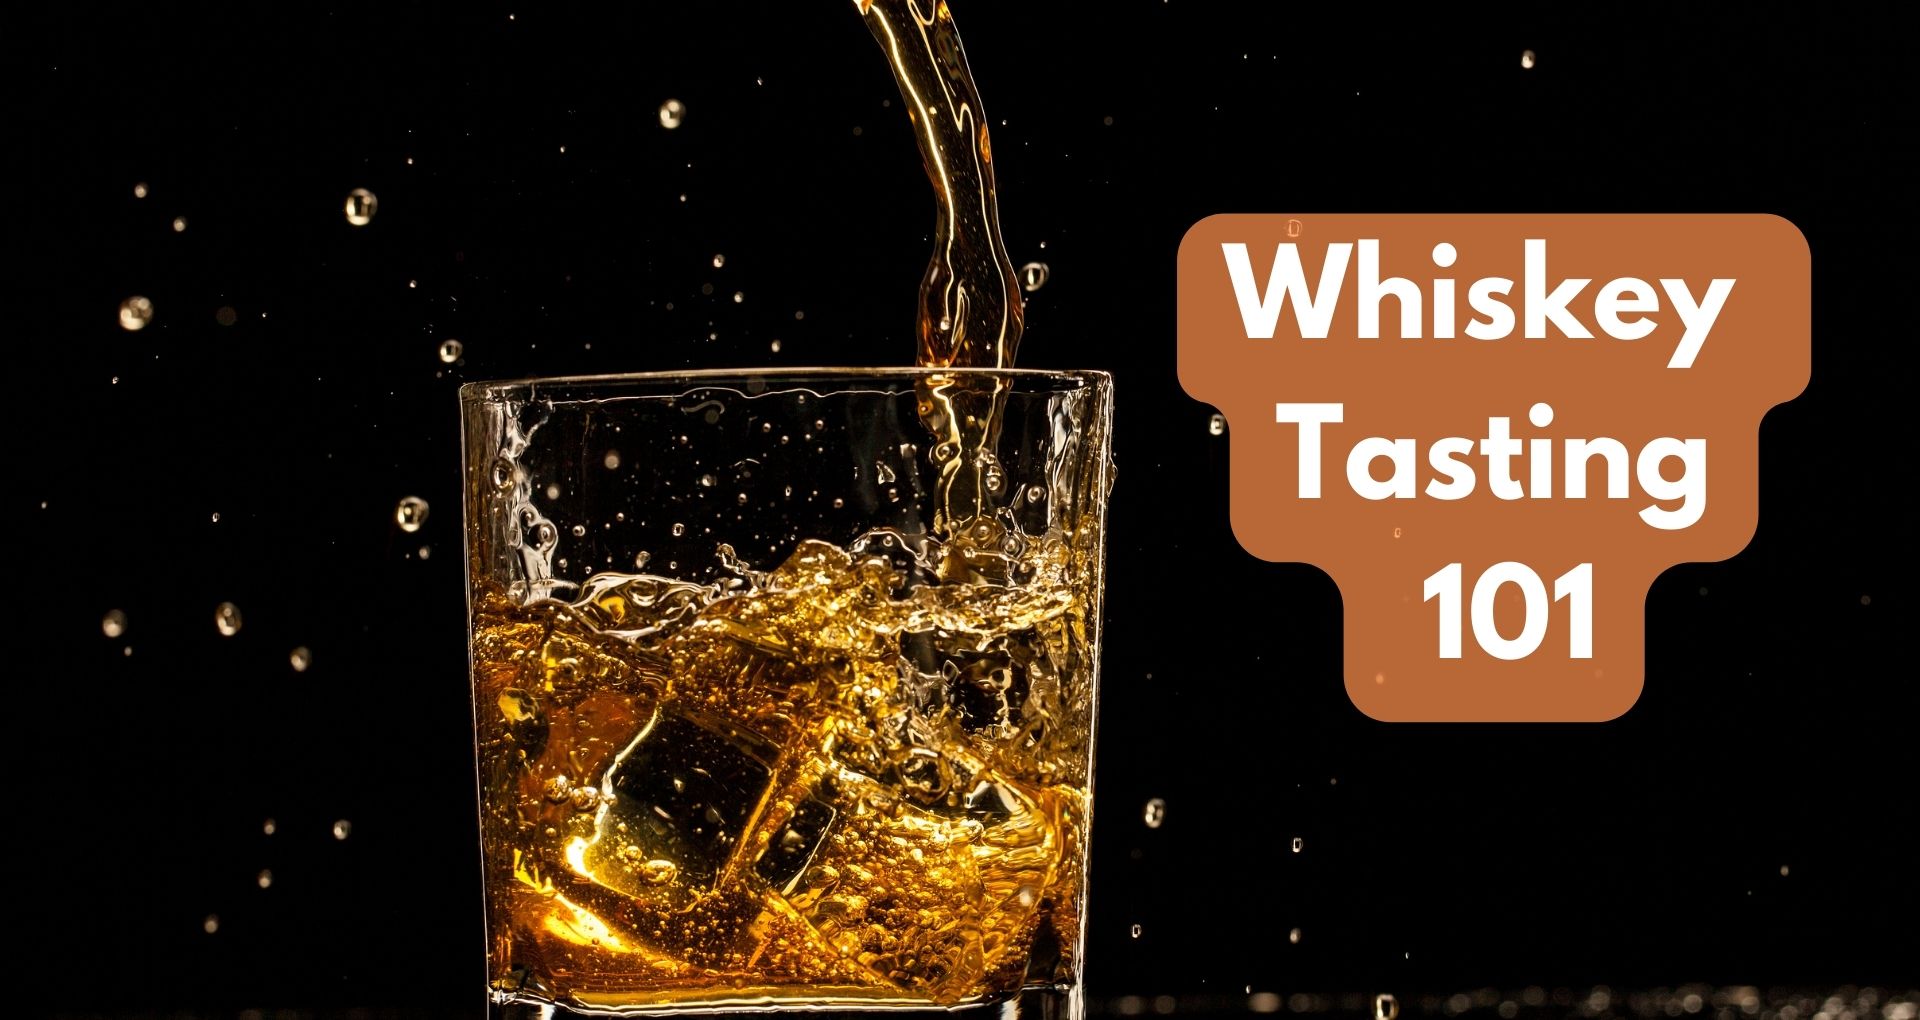 Whiskey Tasting 101: A Quick Introduction